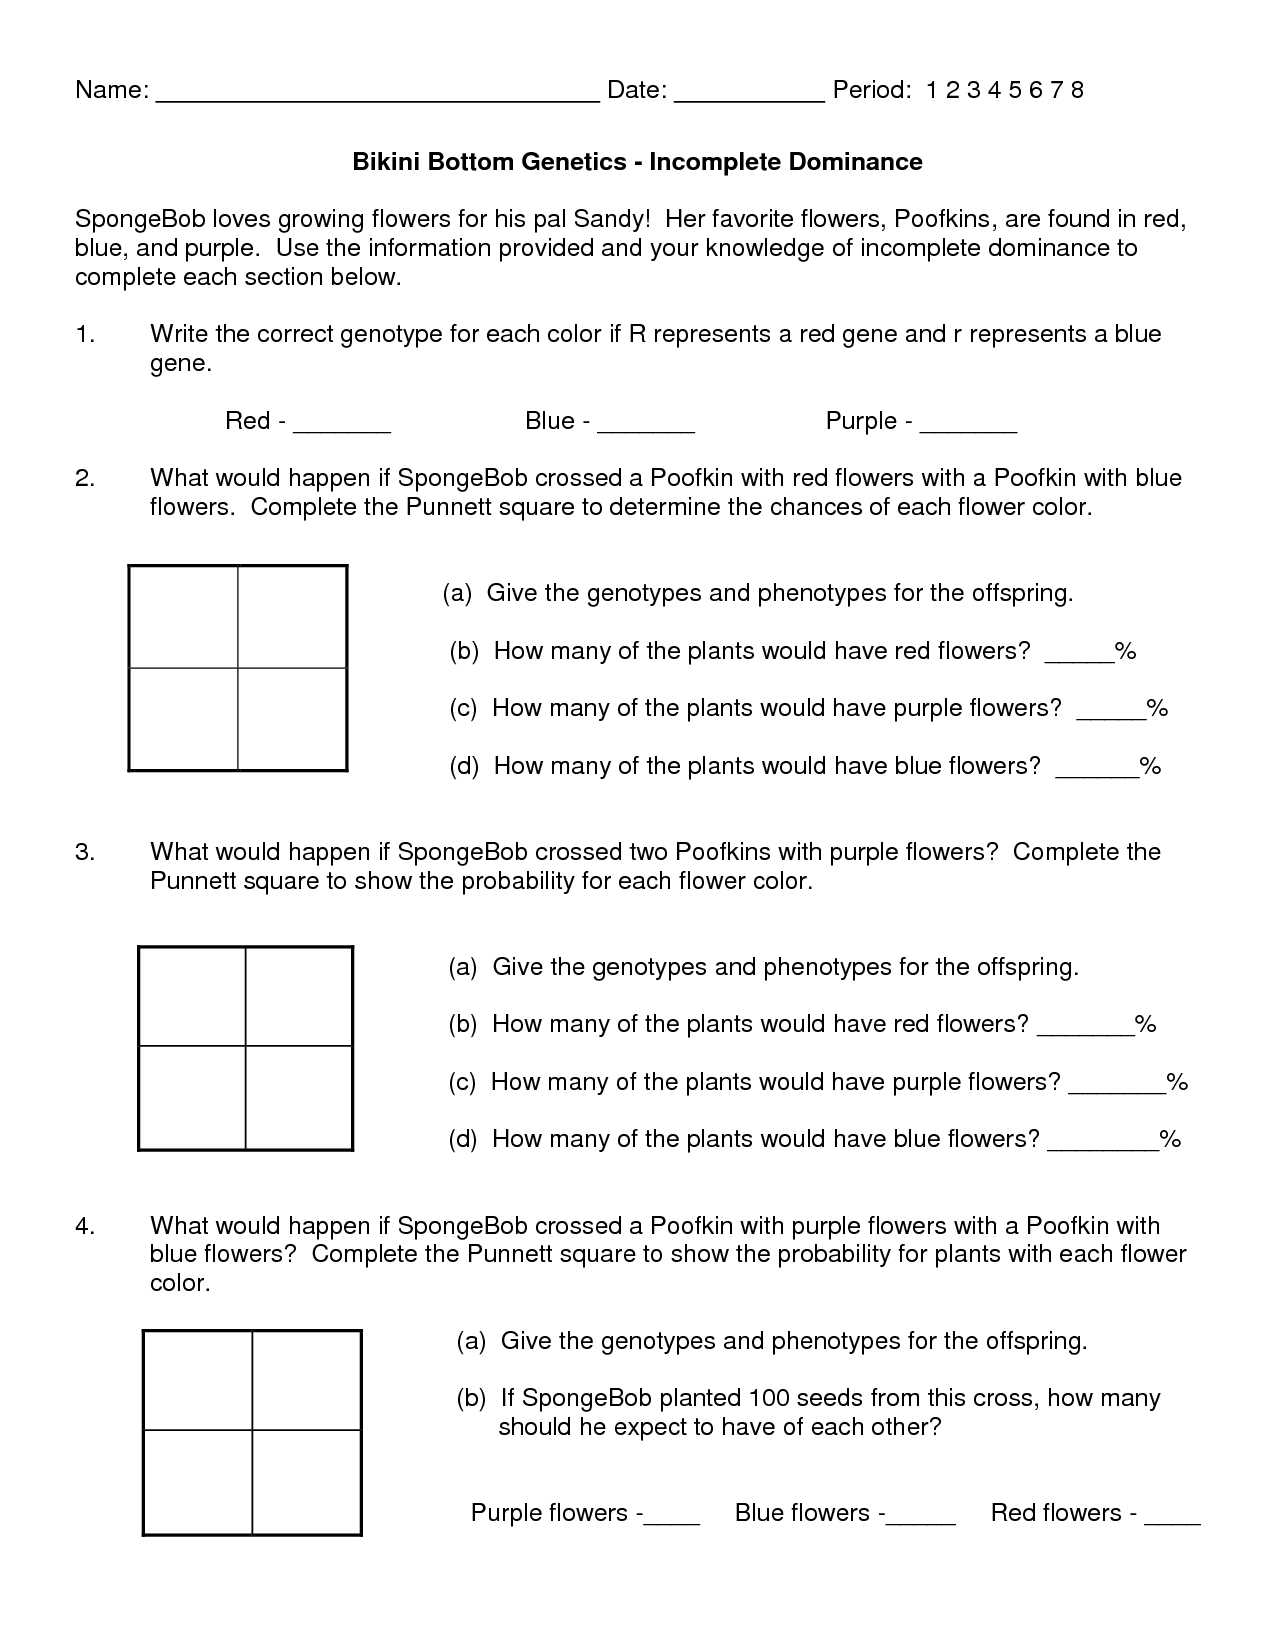 Codominance Incomplete Dominance Worksheet Answers as Well as 48 In Plete and Codominance Worksheet Answers Worksheets